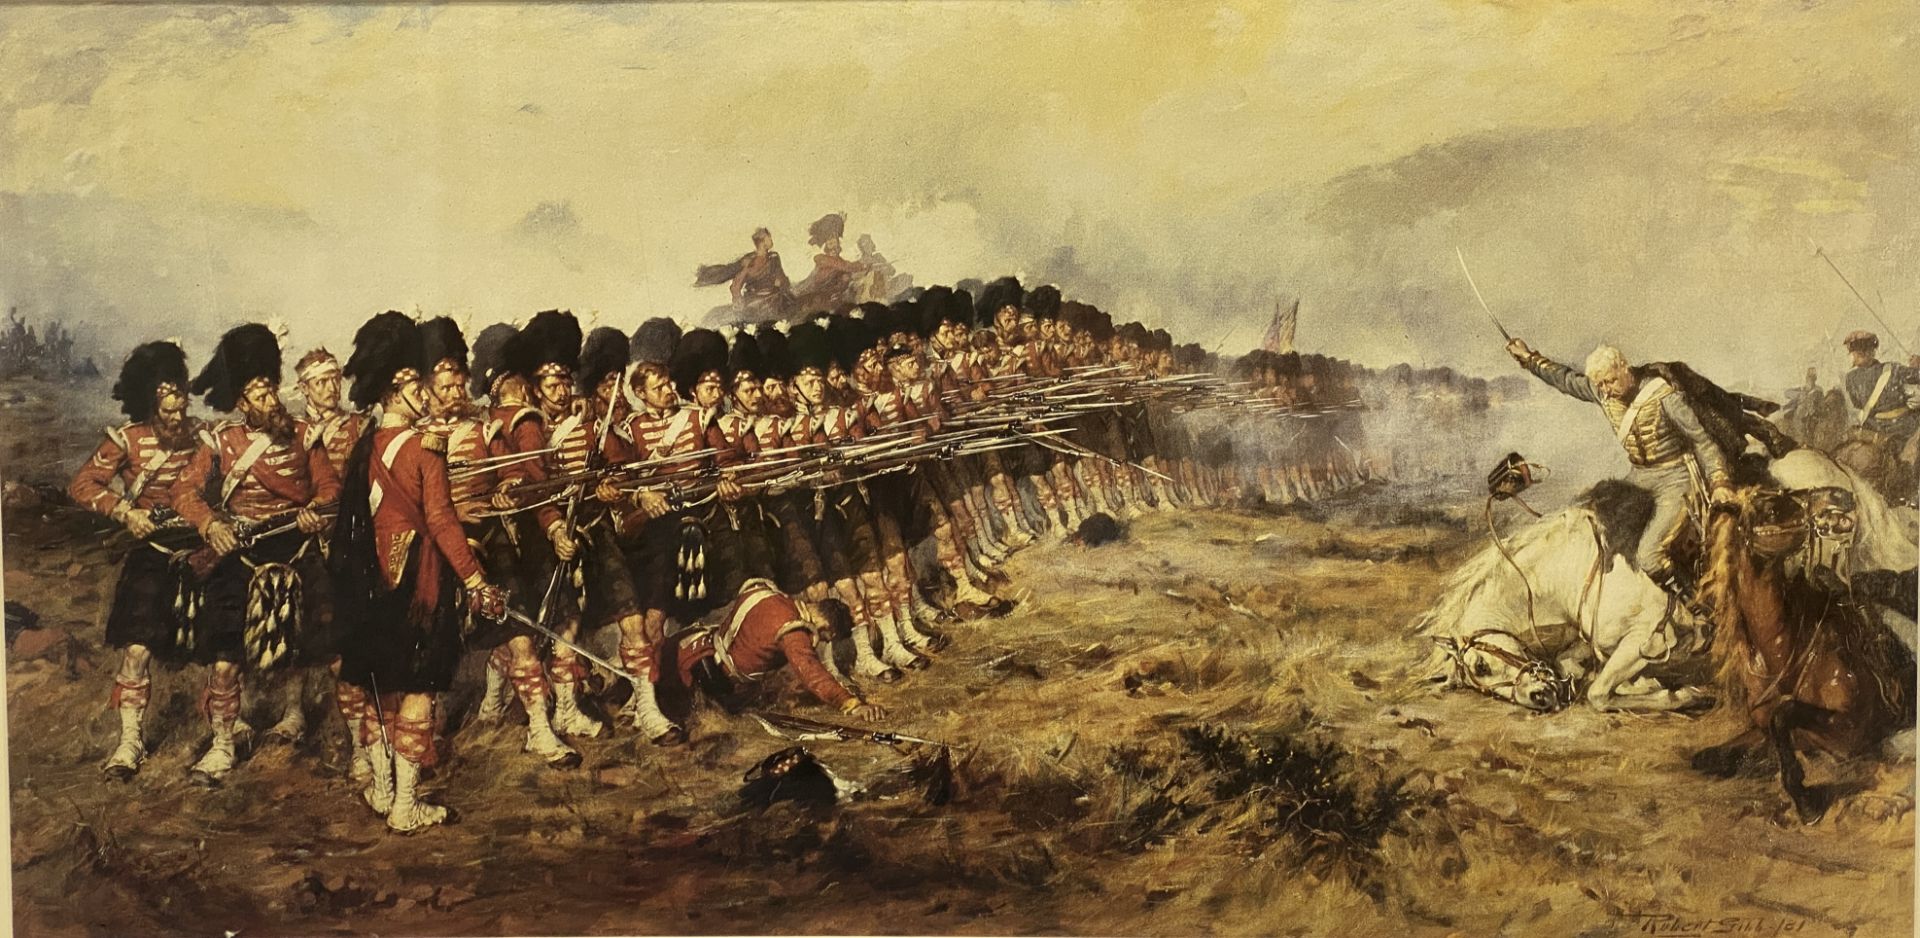 R Gibb large framed print 'The Thin Red Line' - the stand of the Sutherland Highlanders against the - Image 2 of 4